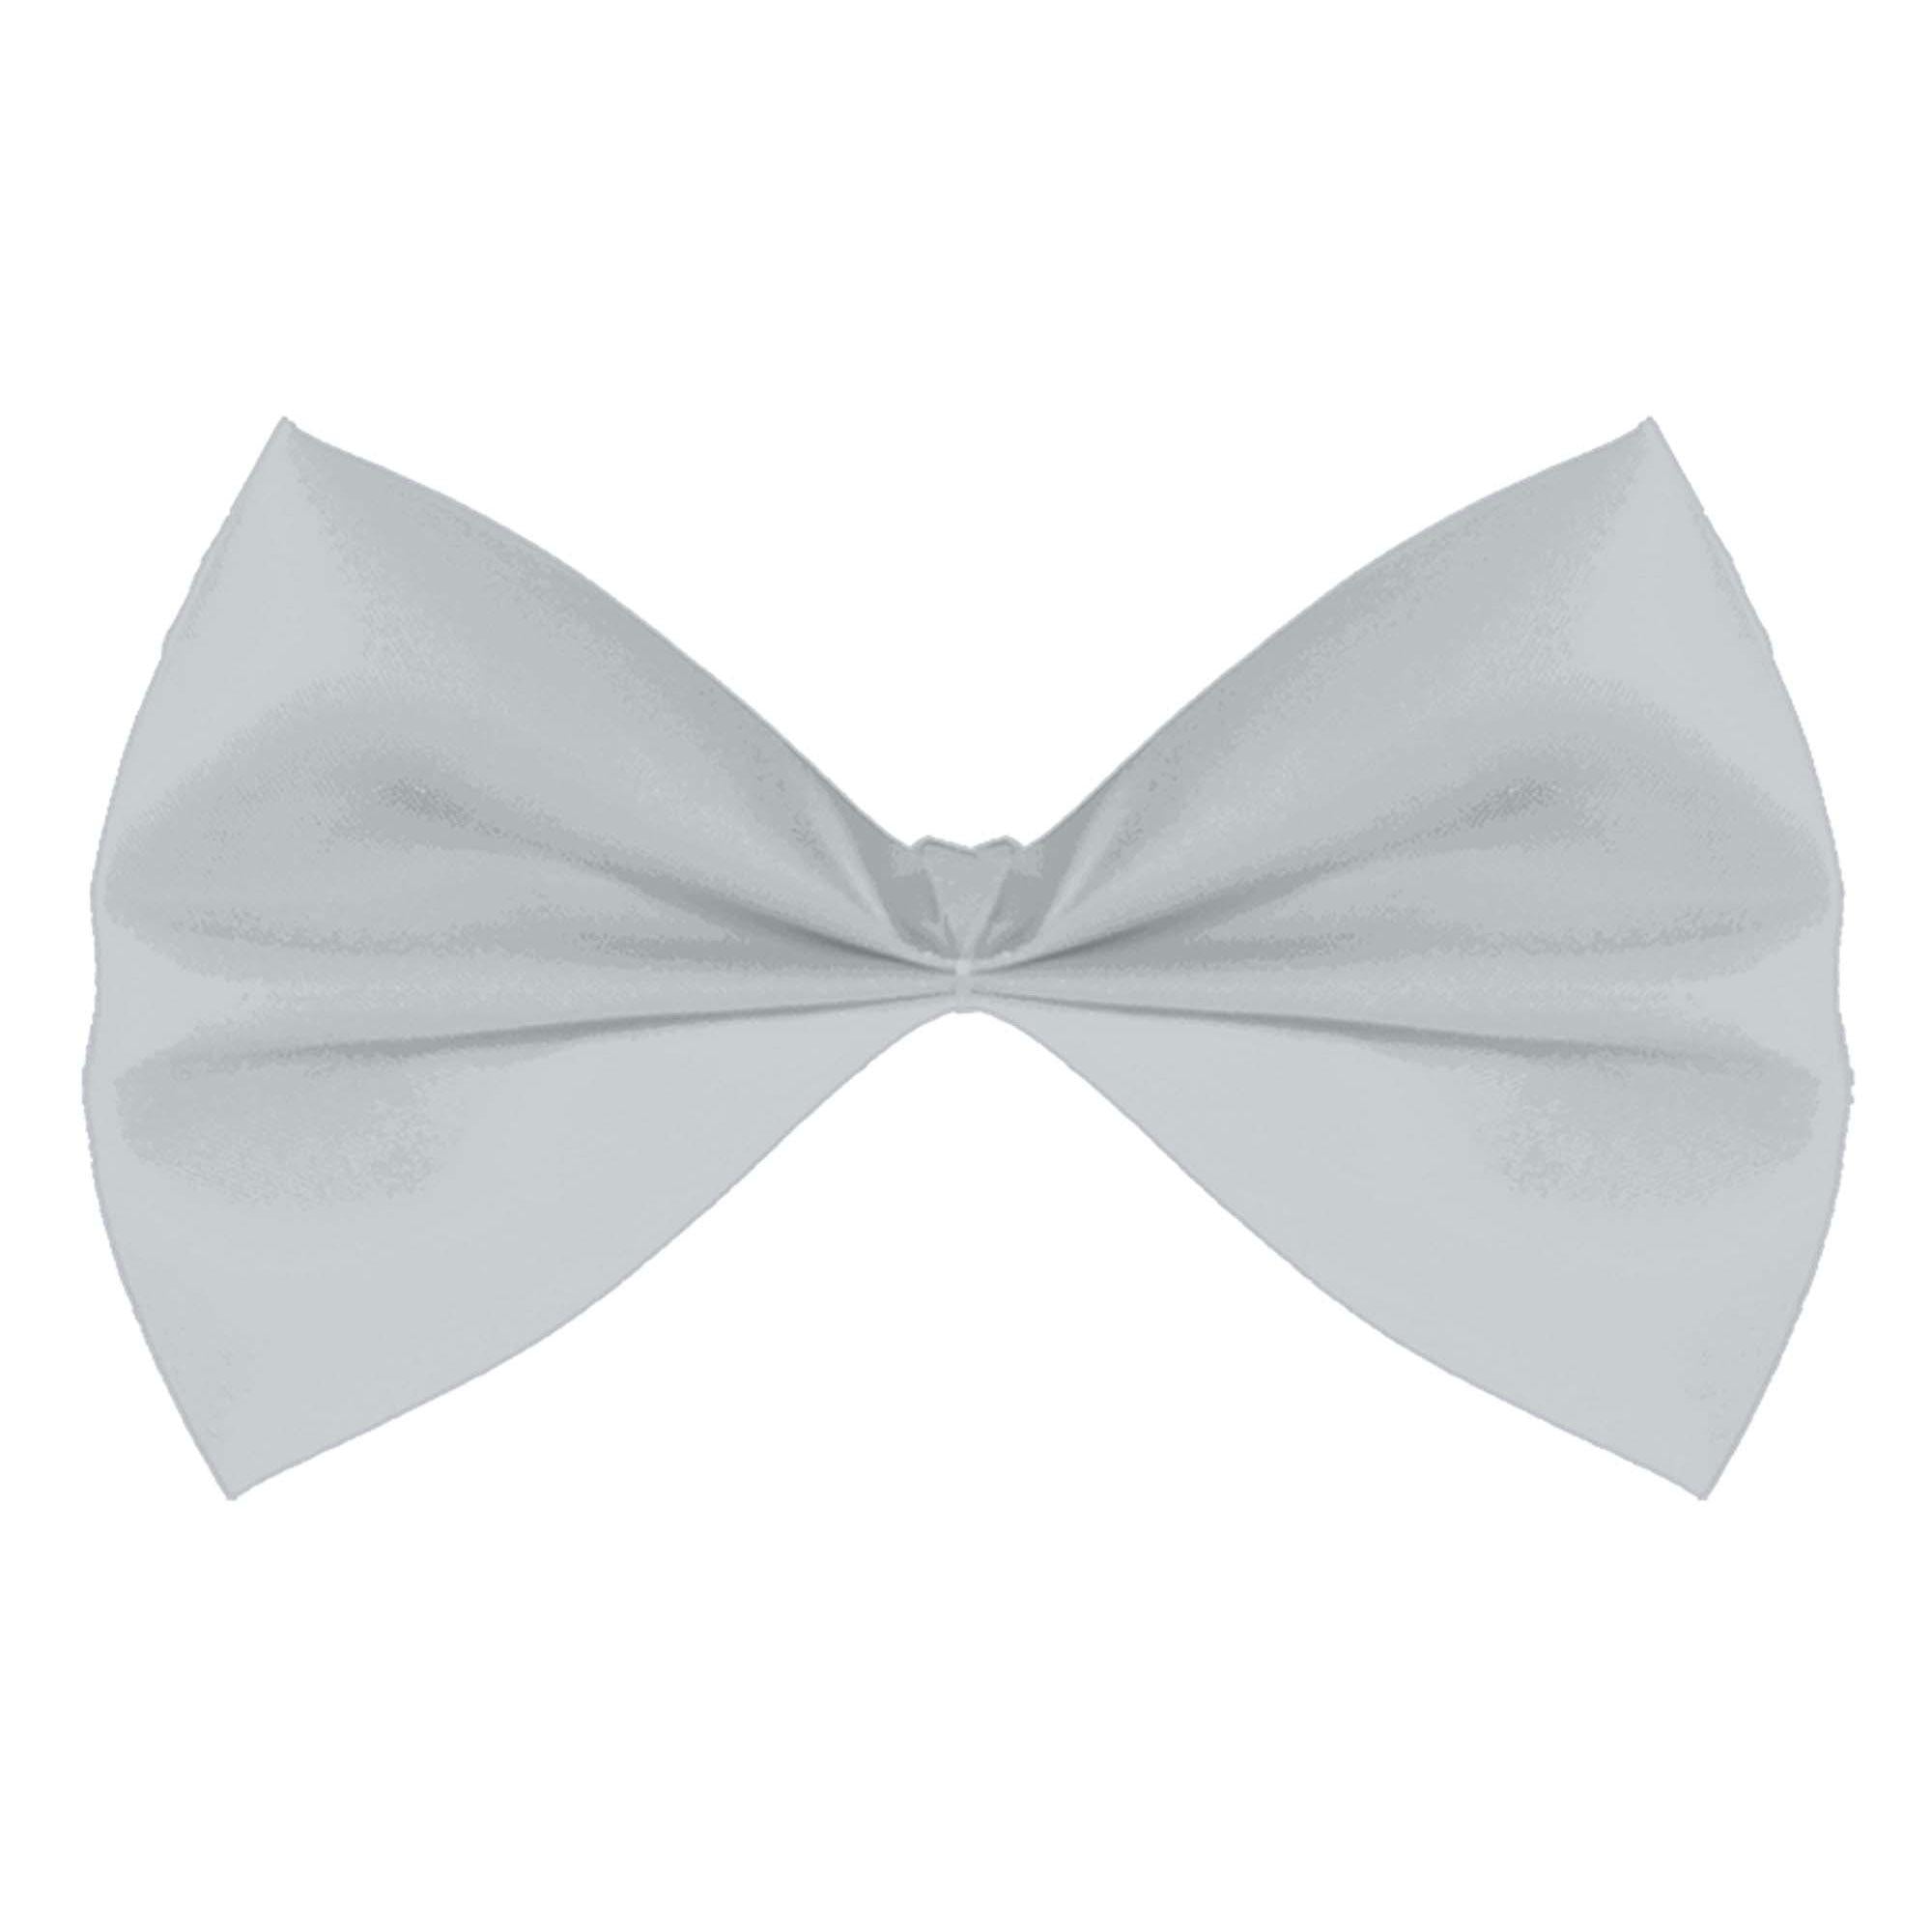 Silver Bow Tie Costumes & Apparel - Party Centre